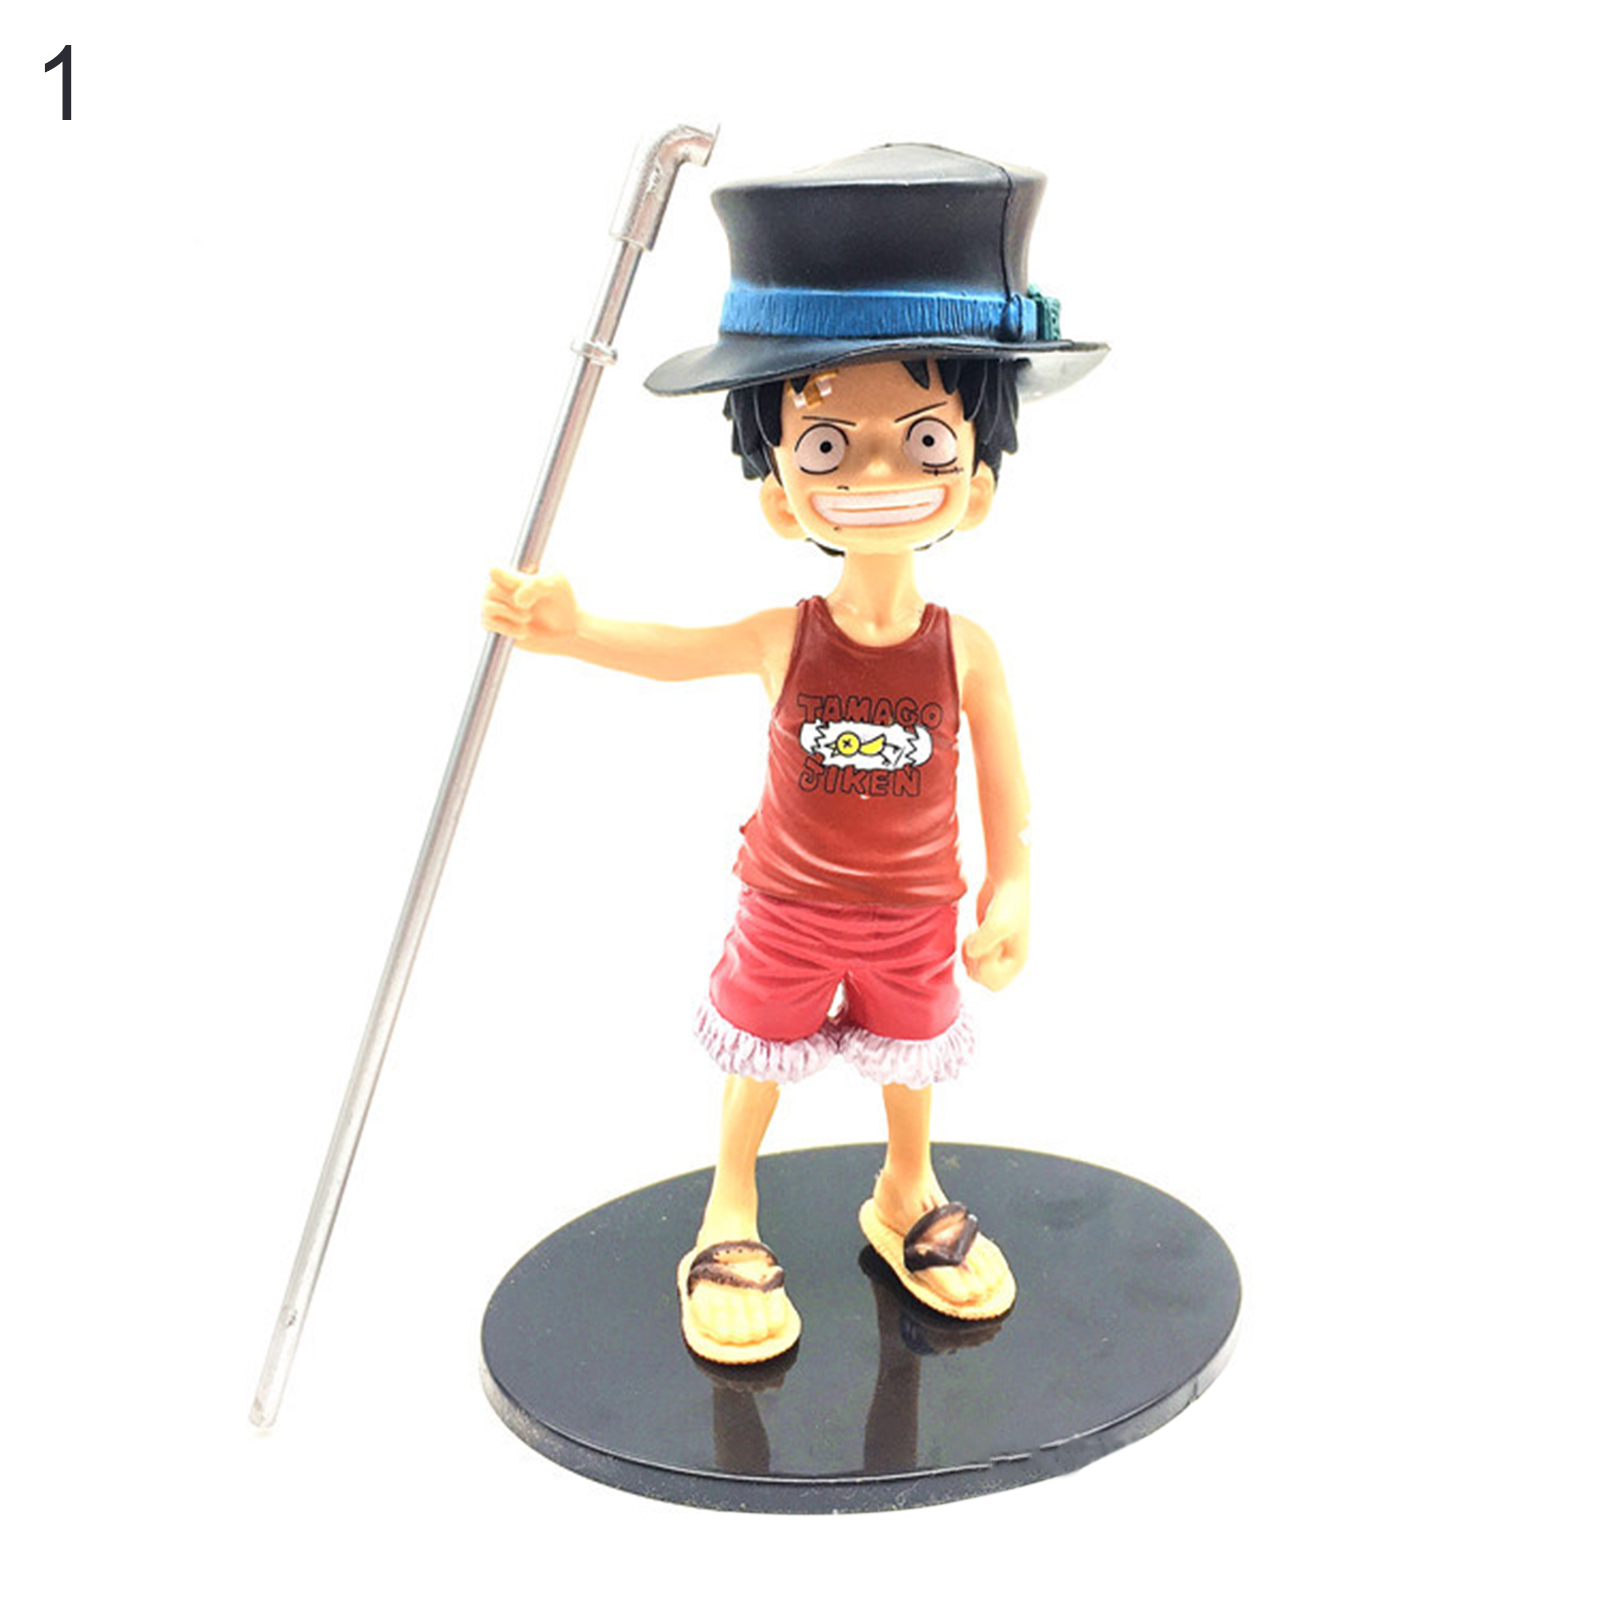 One Piece Unique Anime Christmas Ornament 7pc Luffy Cotton Candy Lover |  eBay